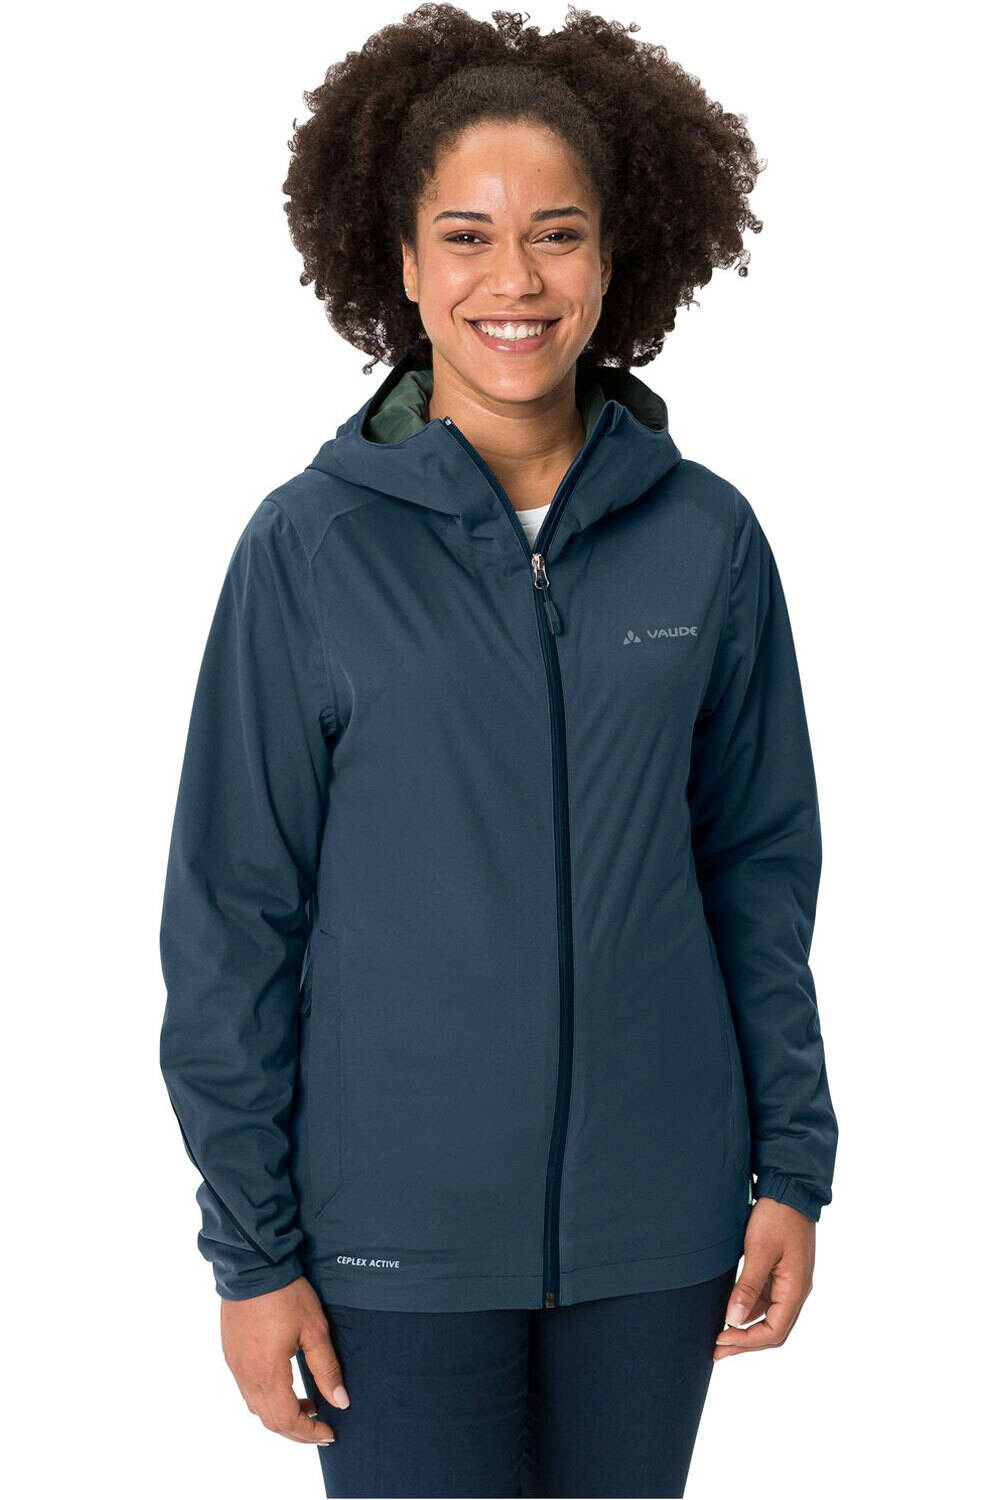 Vaude chaqueta impermeable ciclismo mujer Women's Cyclist Jacket III vista frontal